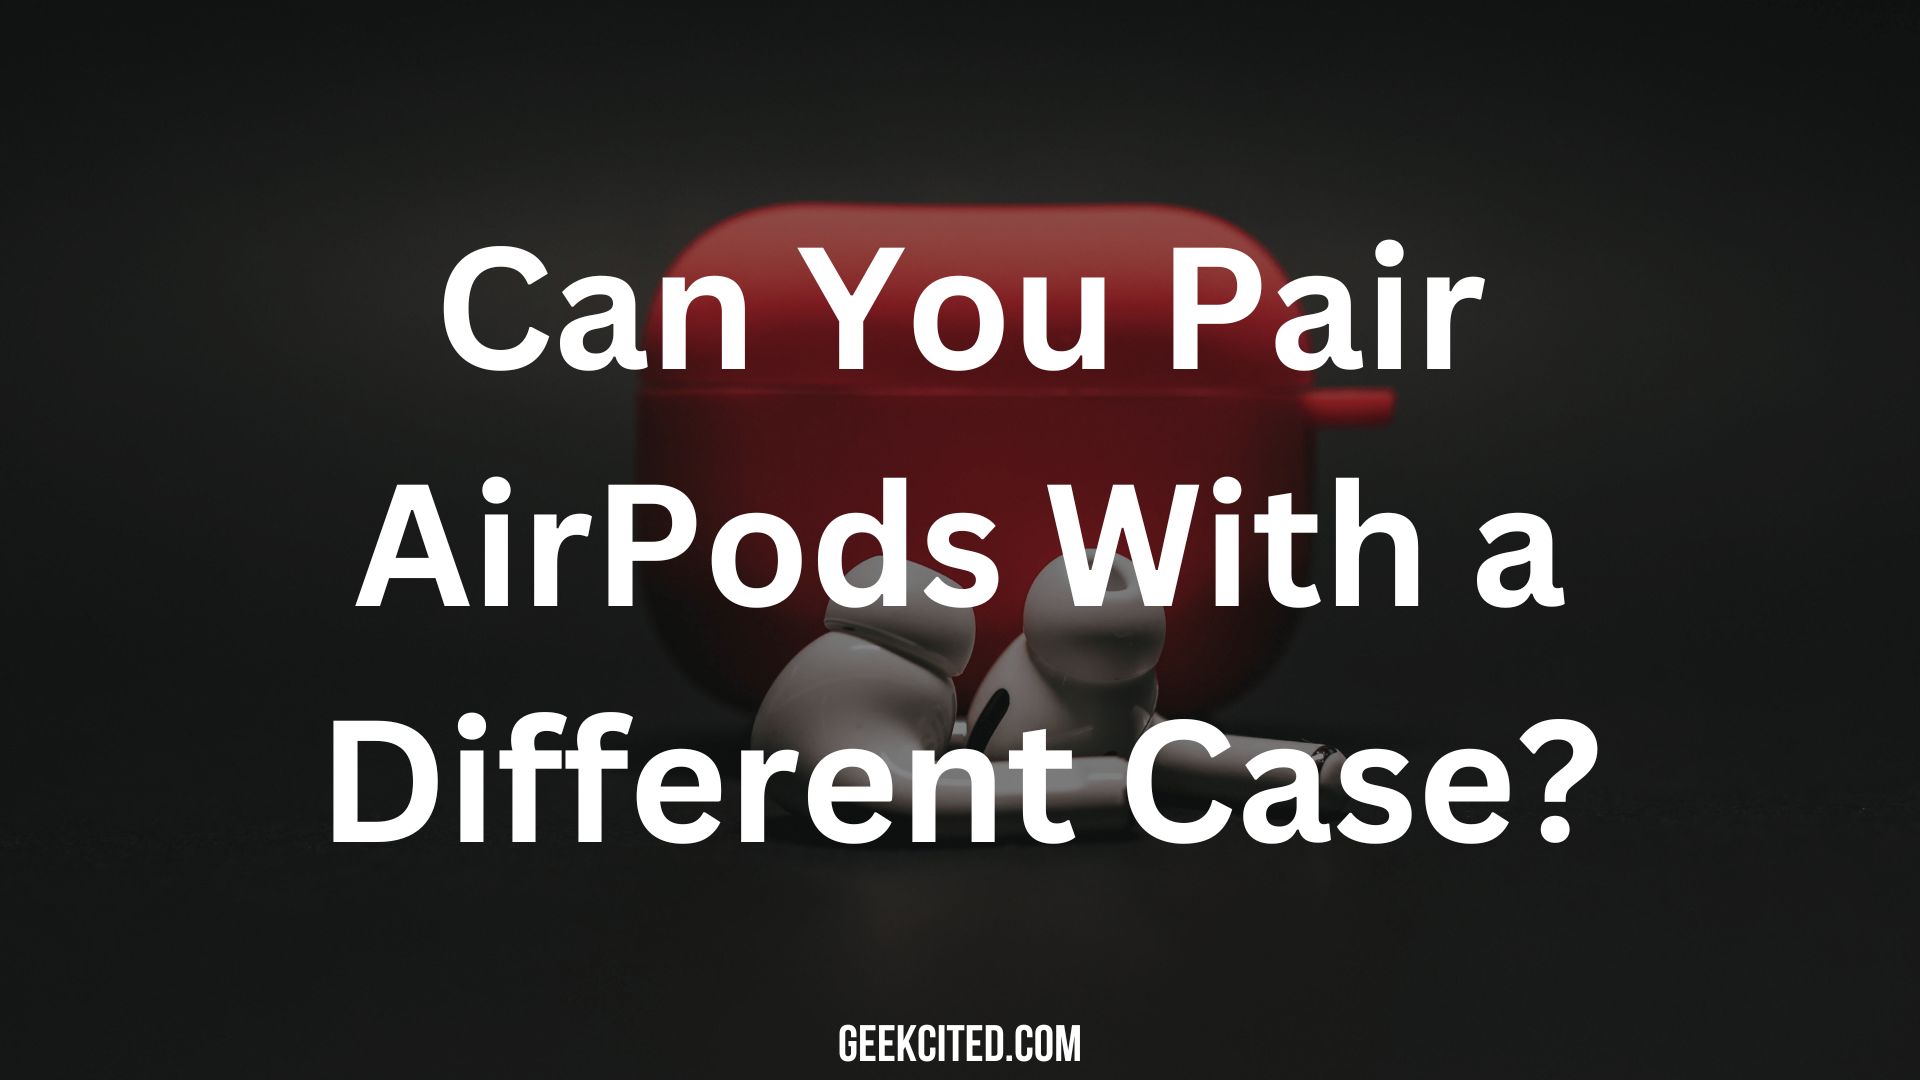 Can You Pair AirPods With a Different Case